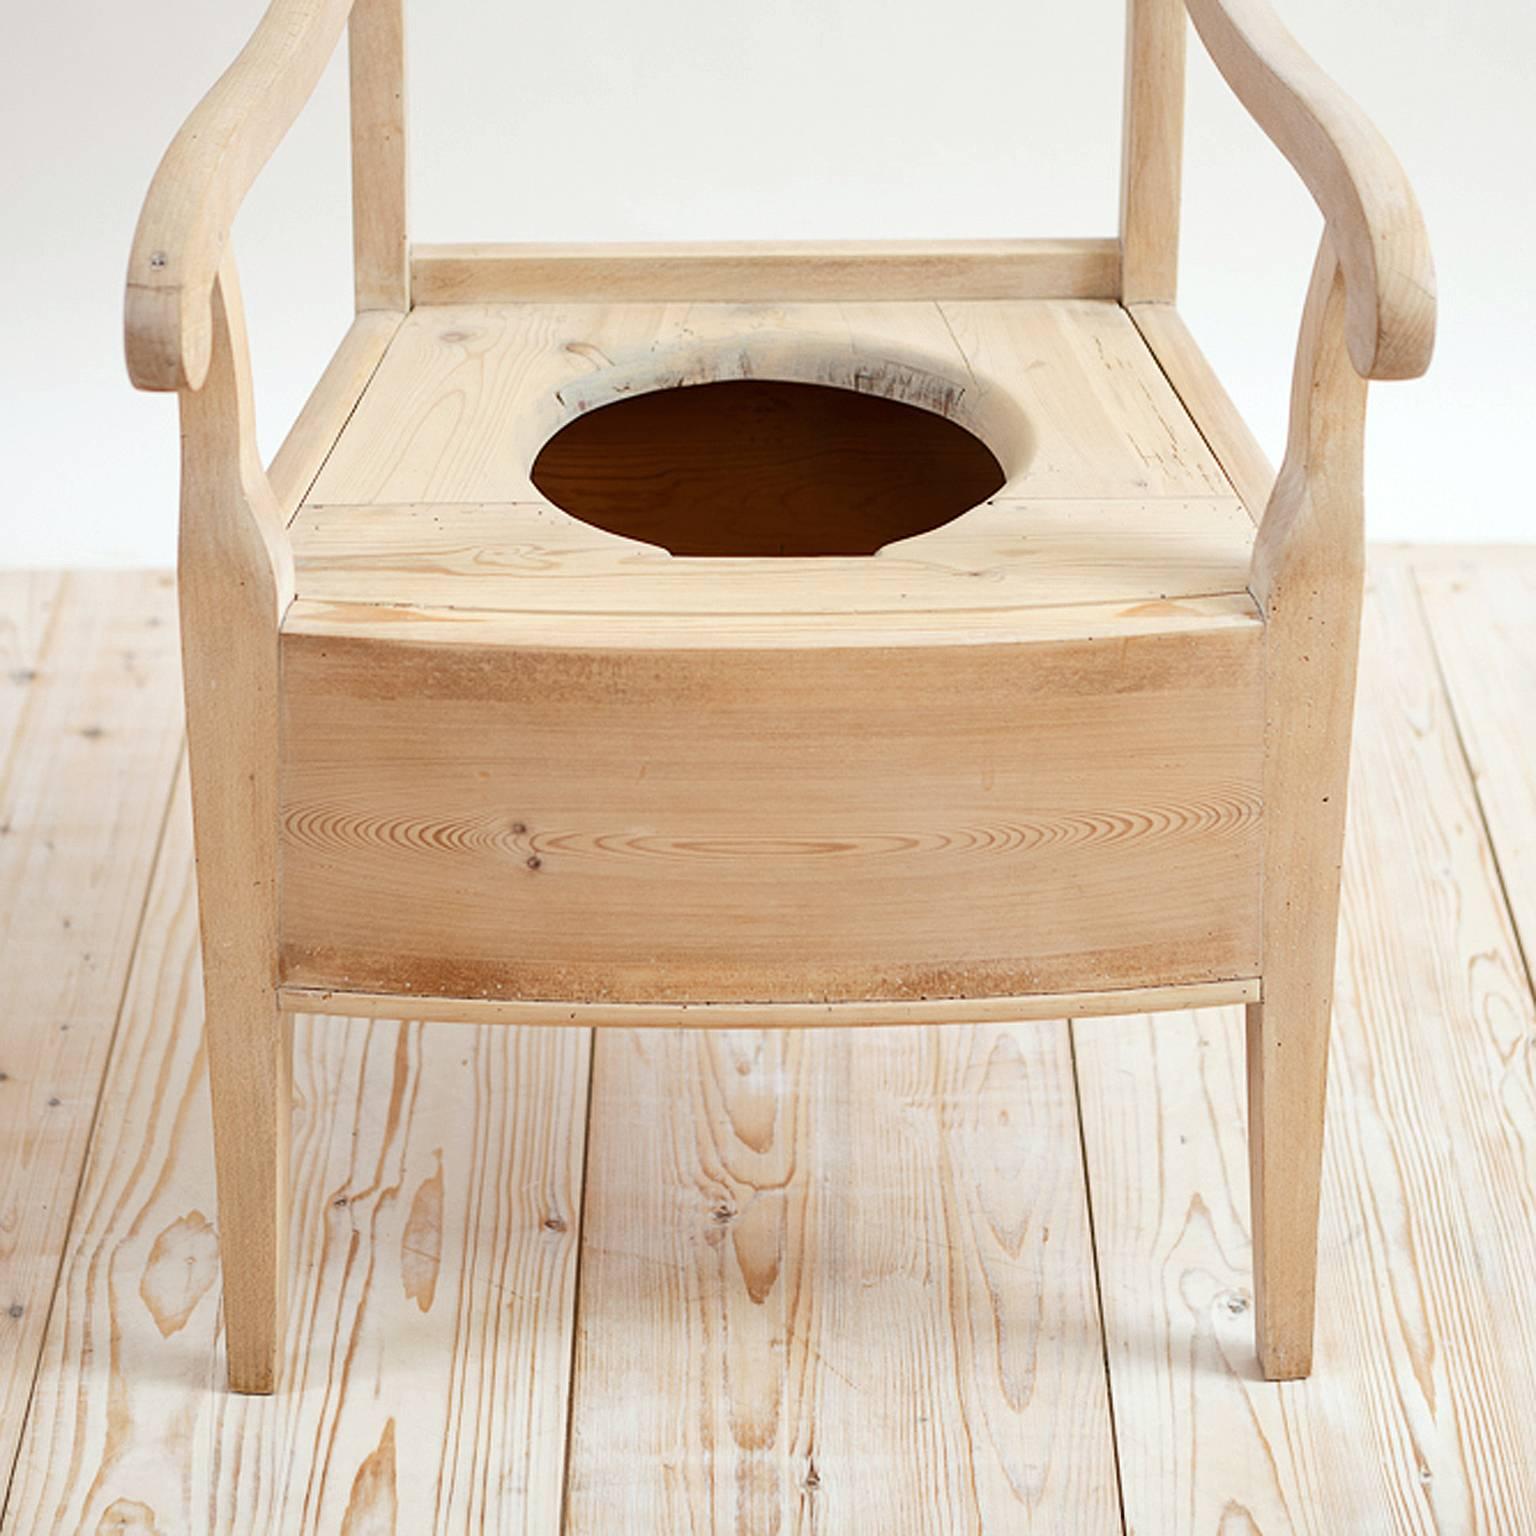 Empire North German Potty Chair in Pine with Chalk Finish and Upholstered Seat, c. 1820